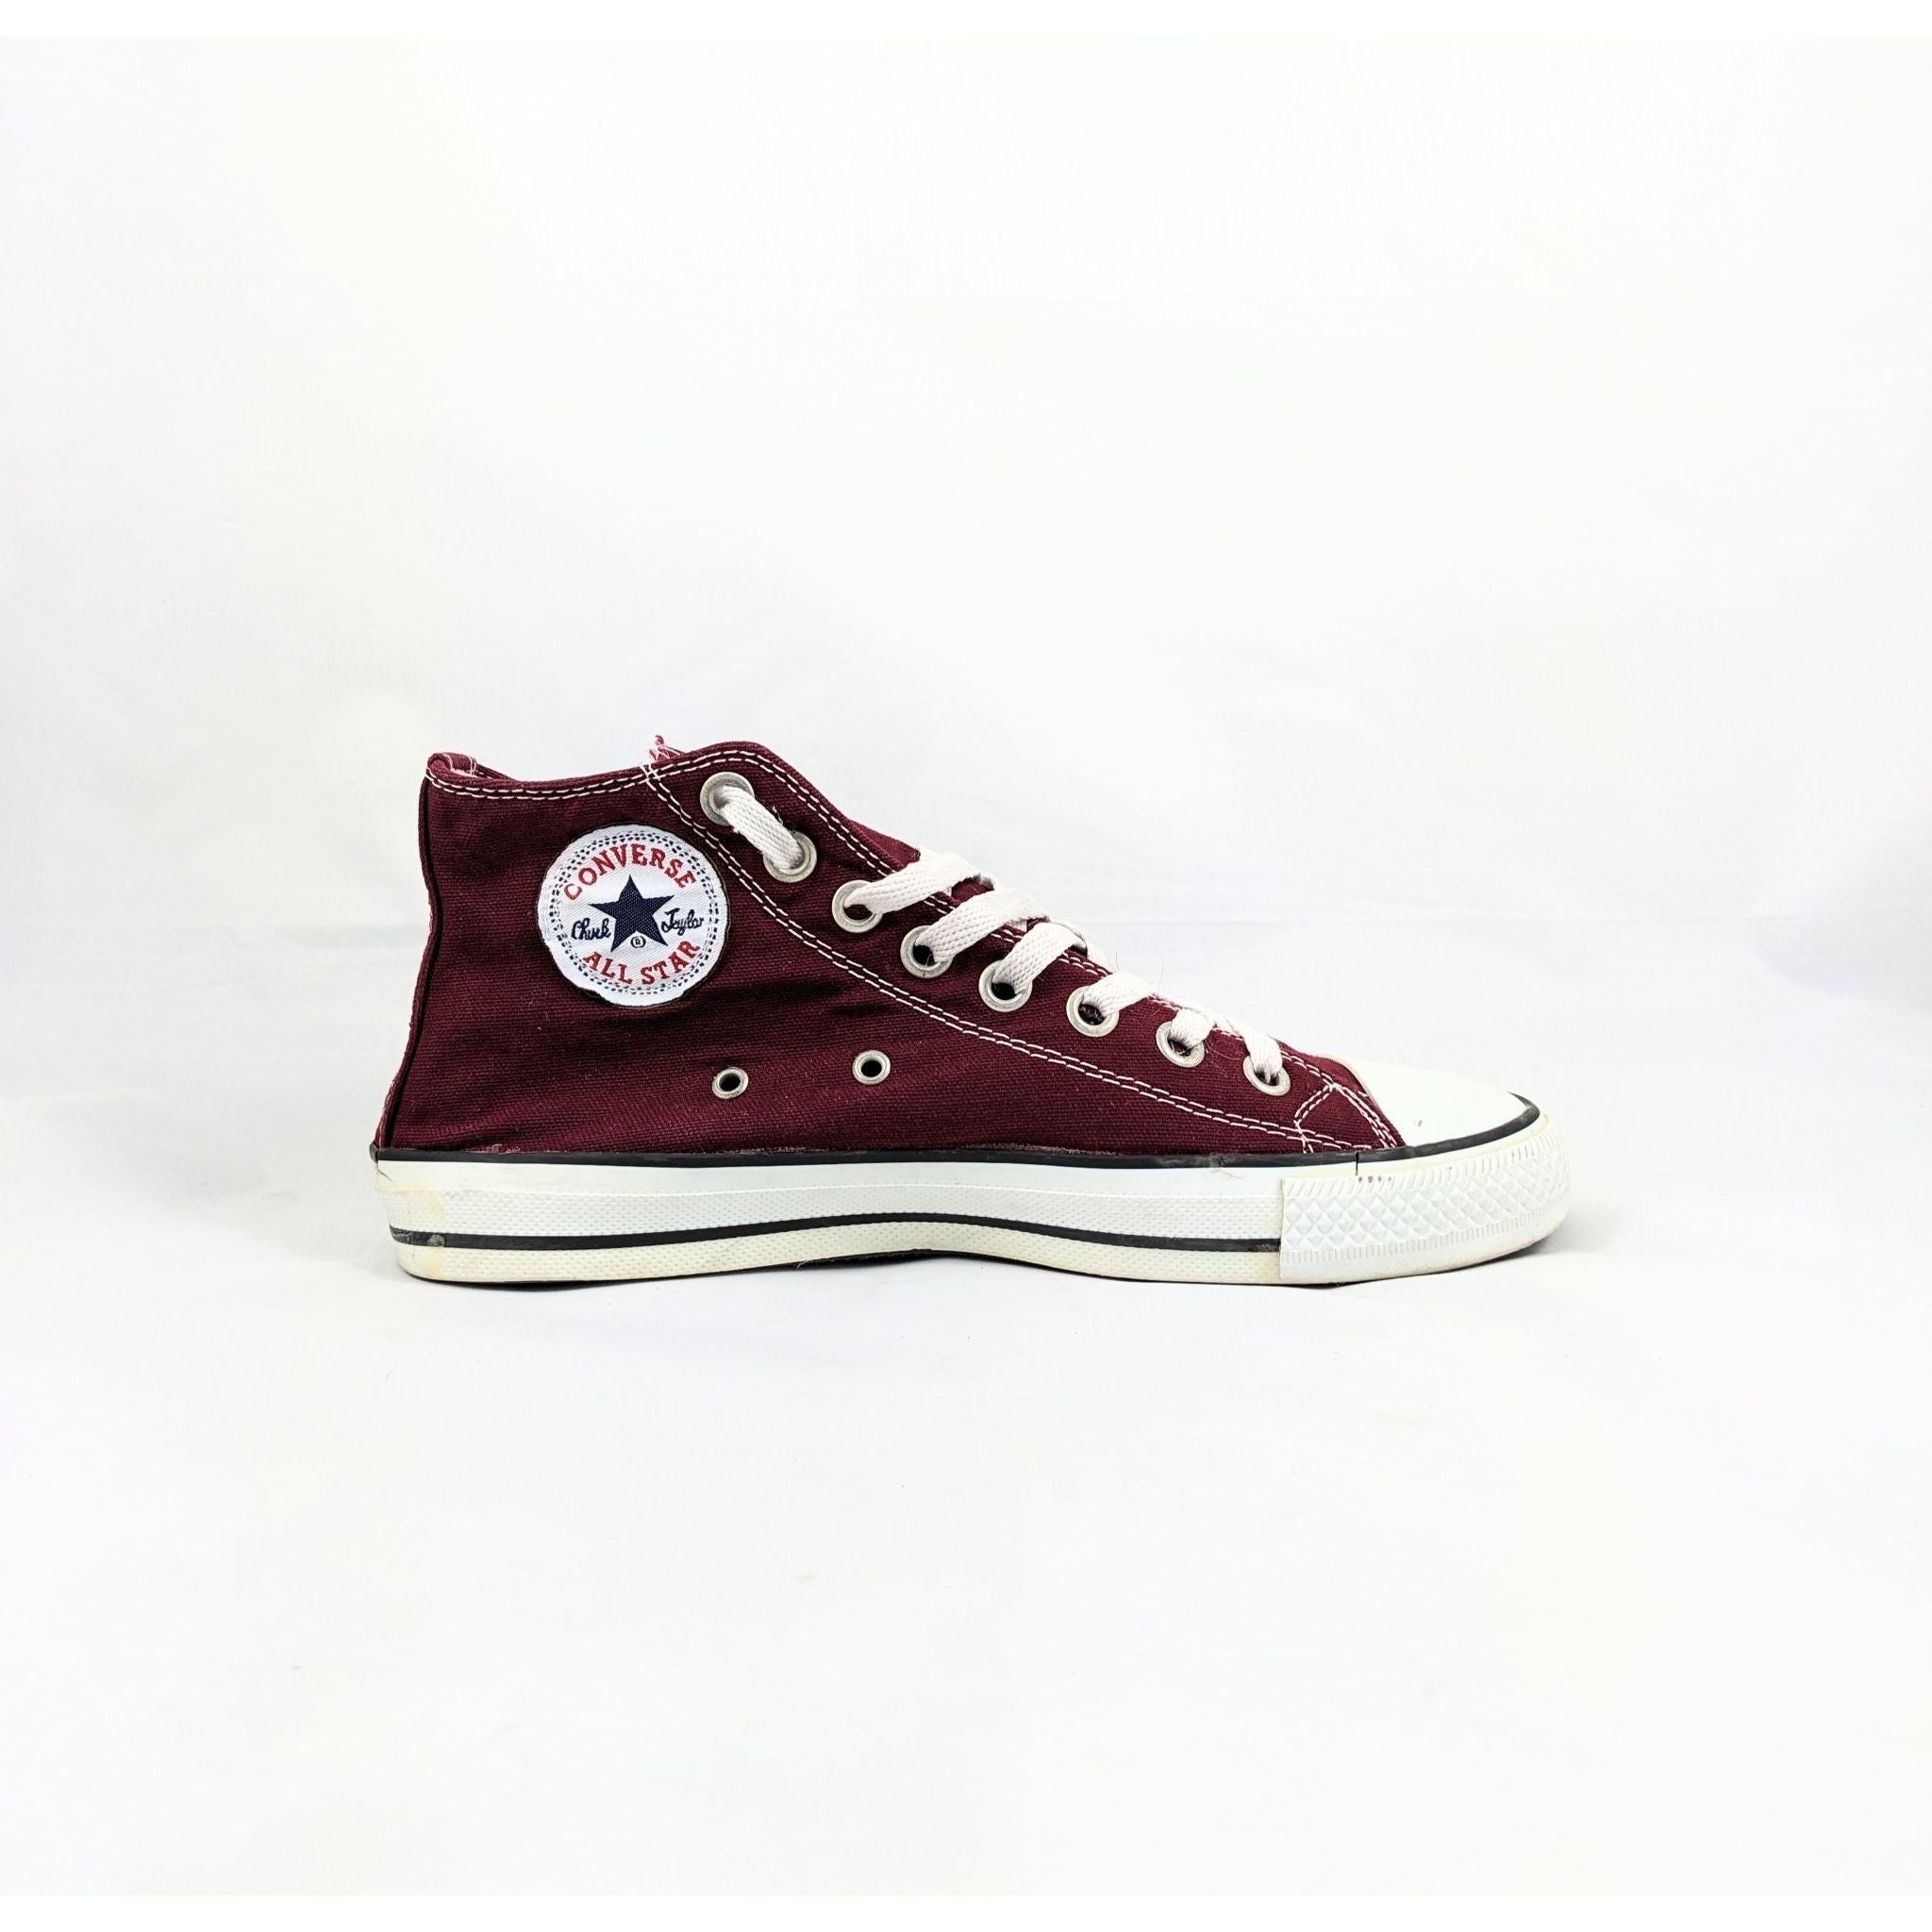 Converse All Star Maroon Hightop Sneakers Imported and Original